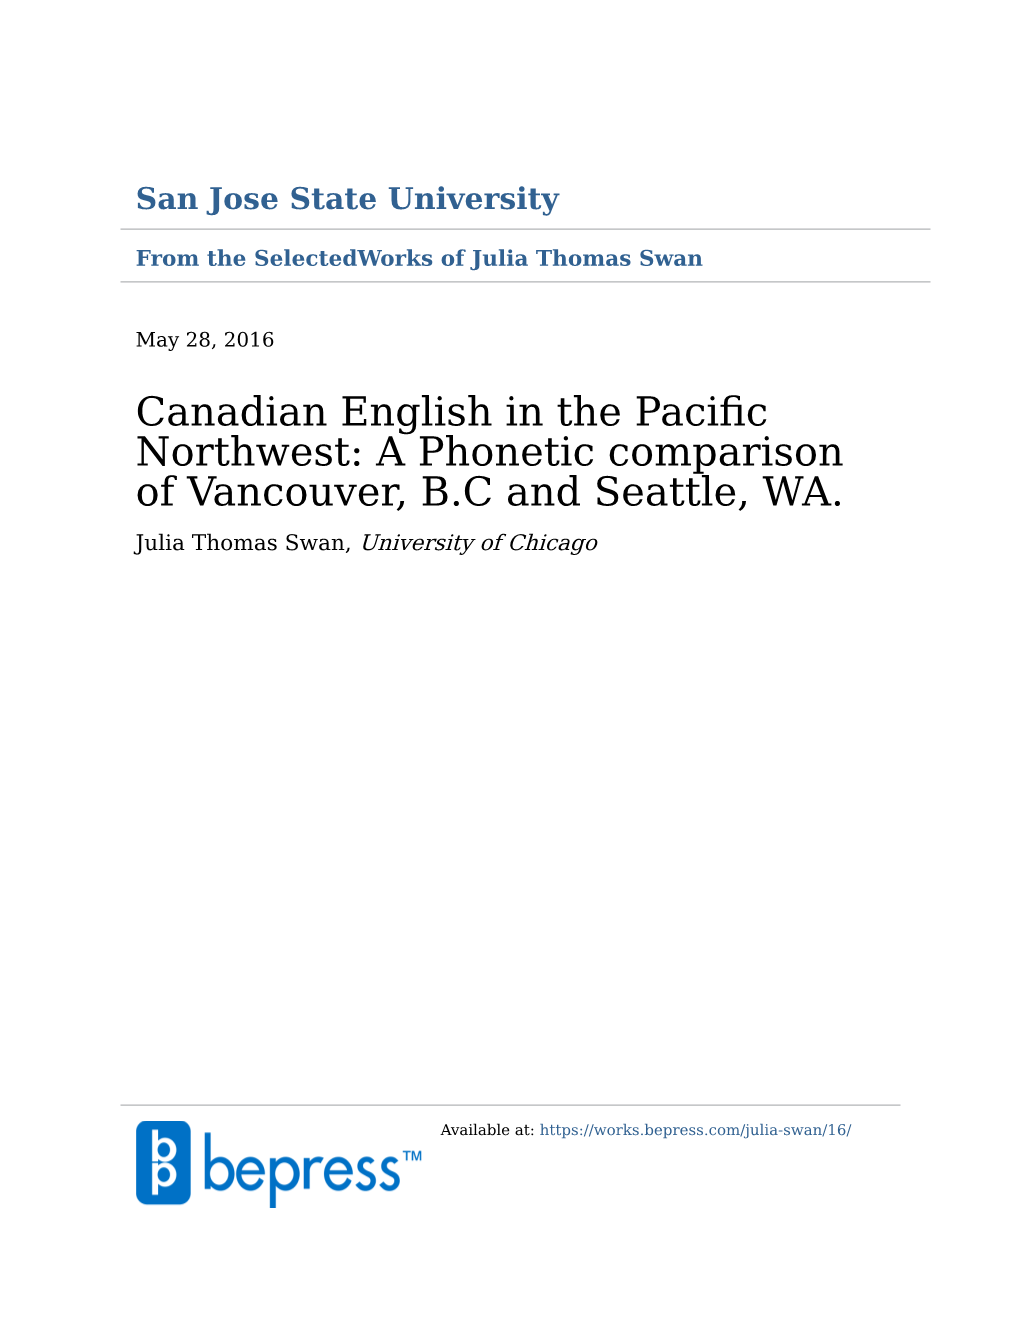 A Phonetic Comparison of Vancouver, Bc and Seattle, Wa*